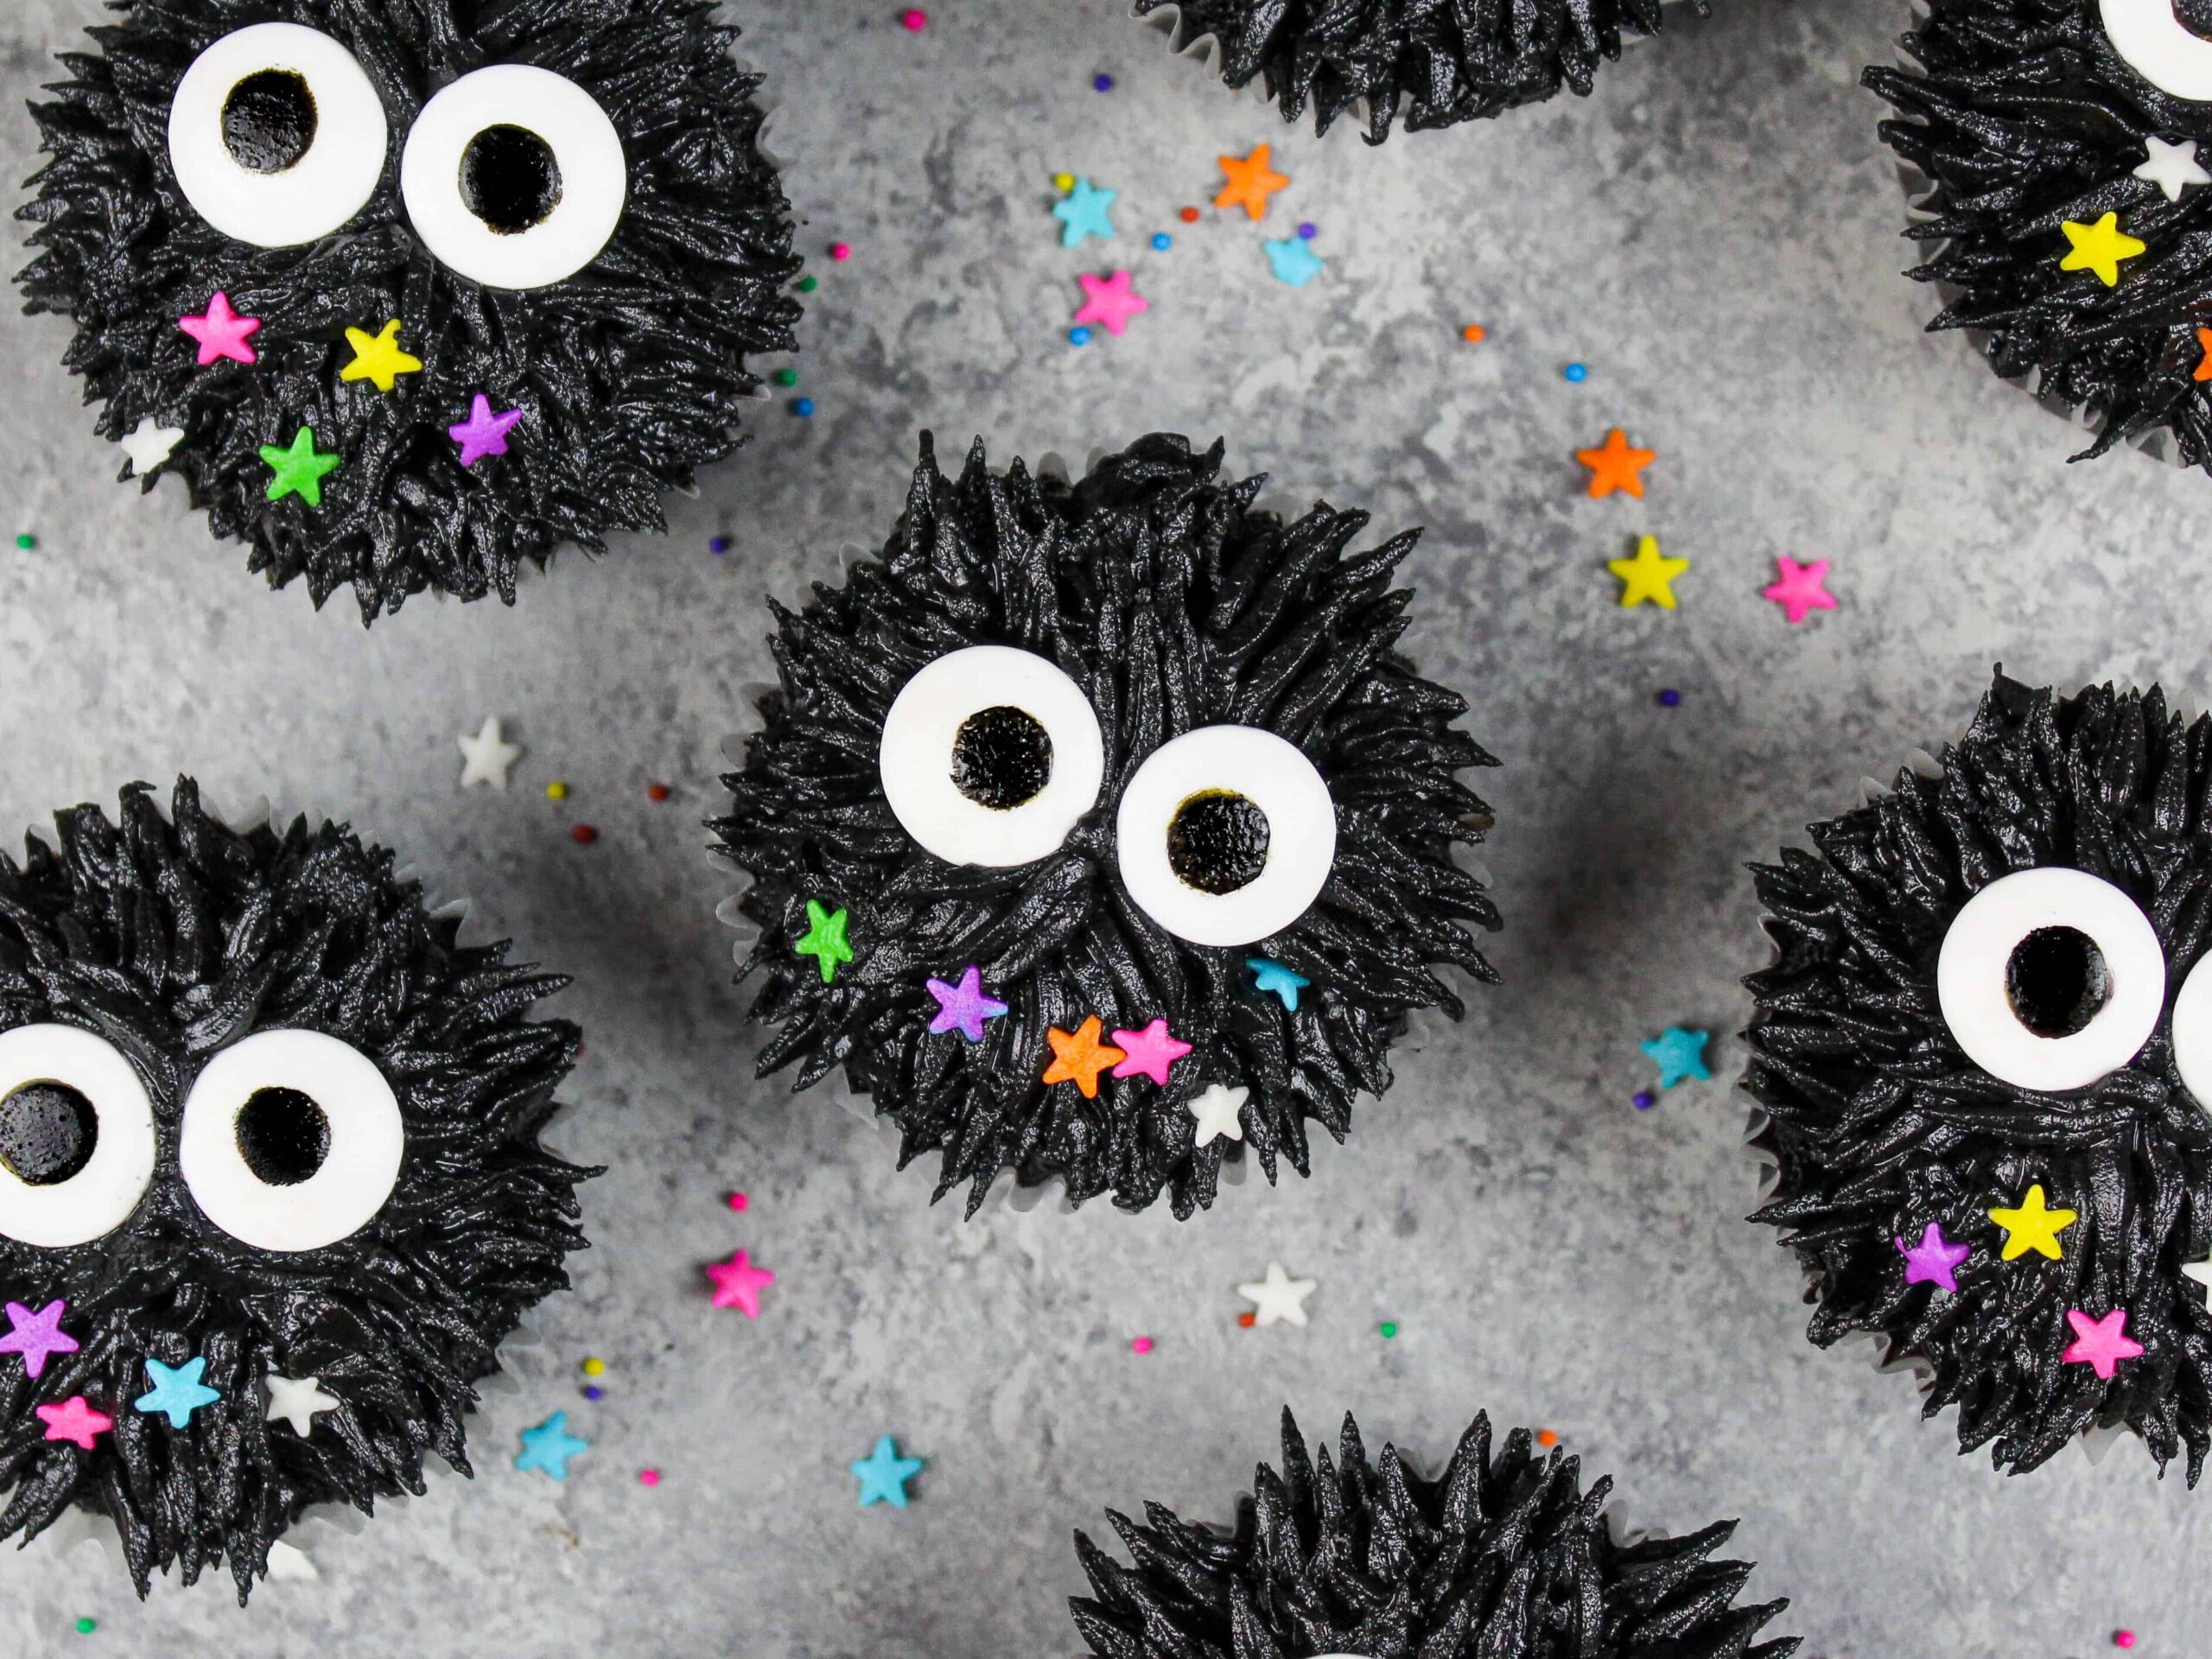 image of soot sprite cupcakes from spirited away and totoro